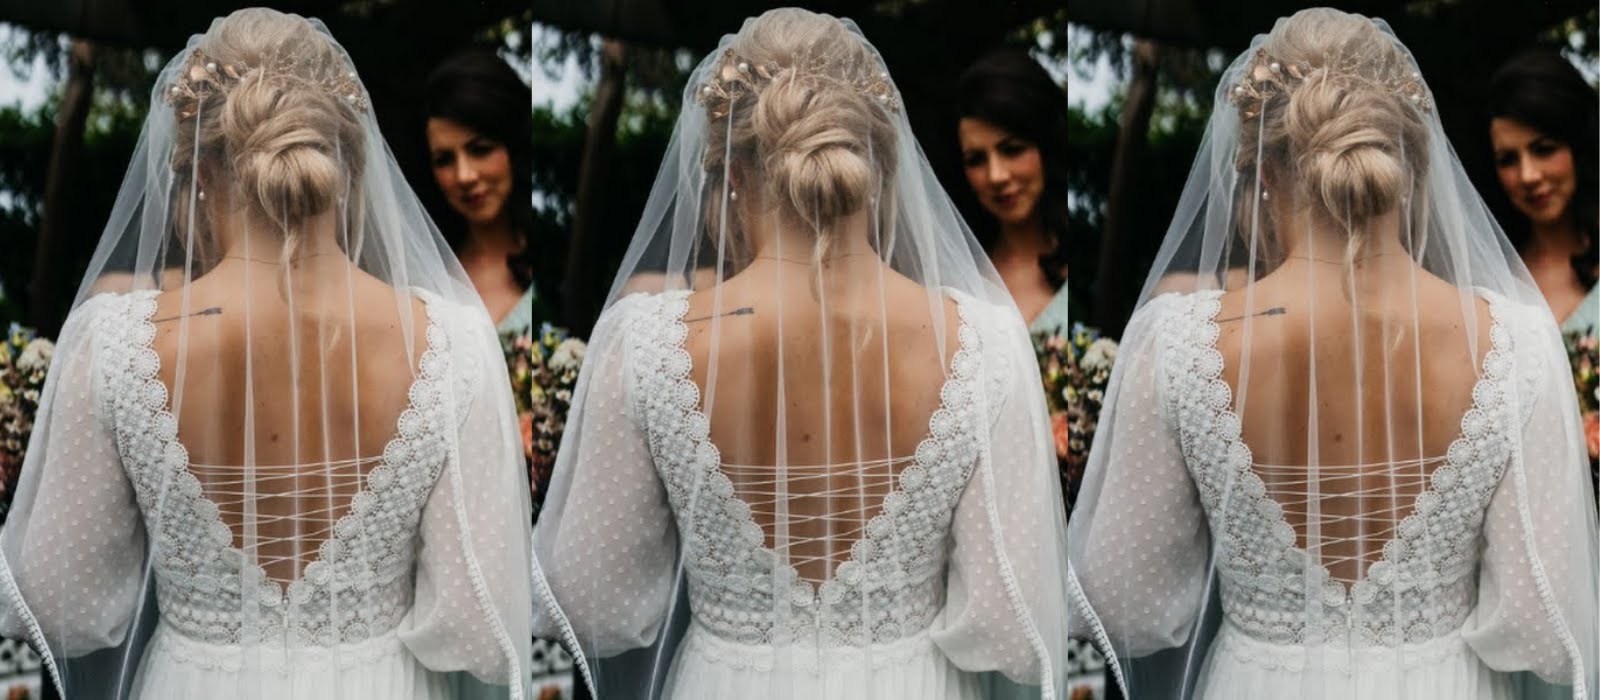 Gorgeous wedding day hairstyles that are trending right now